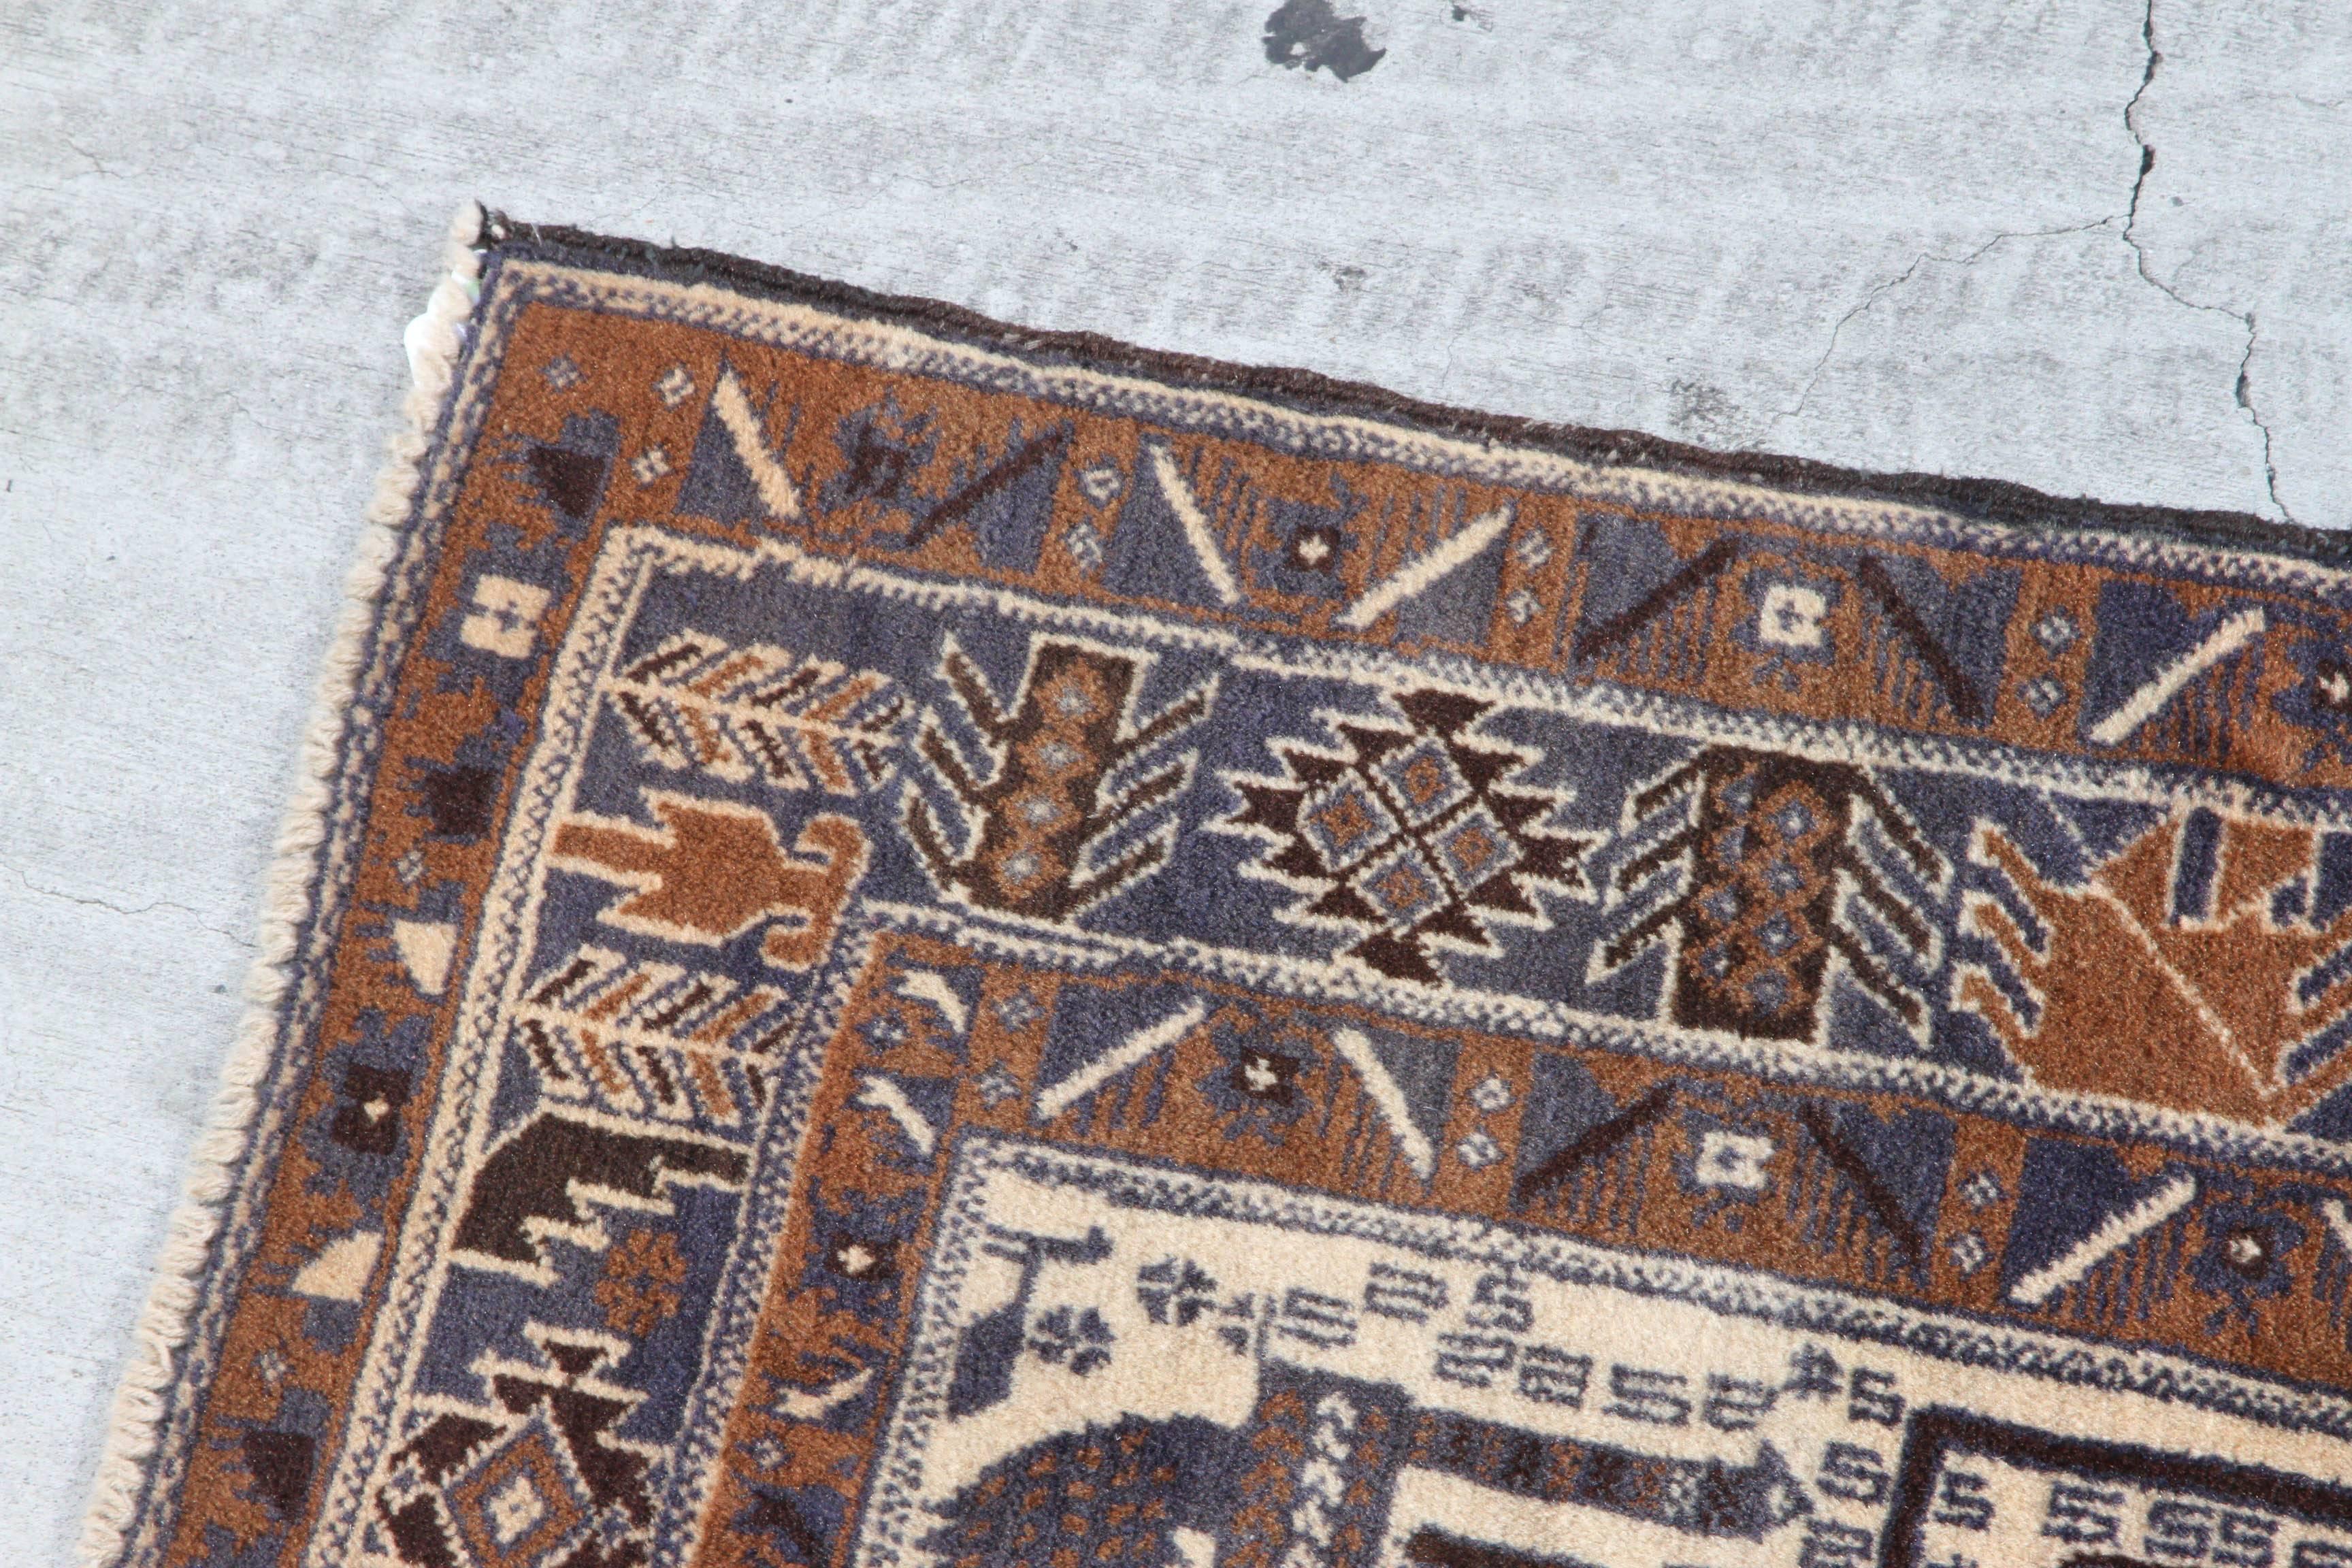 Antique Persian Baluchi rug with blue creatures and warm hues pattern surrounding them. Baluchi carpets are handmade carpets originally made by Baluch nomads, living near Iraq, Pakistan and Afghanistan.